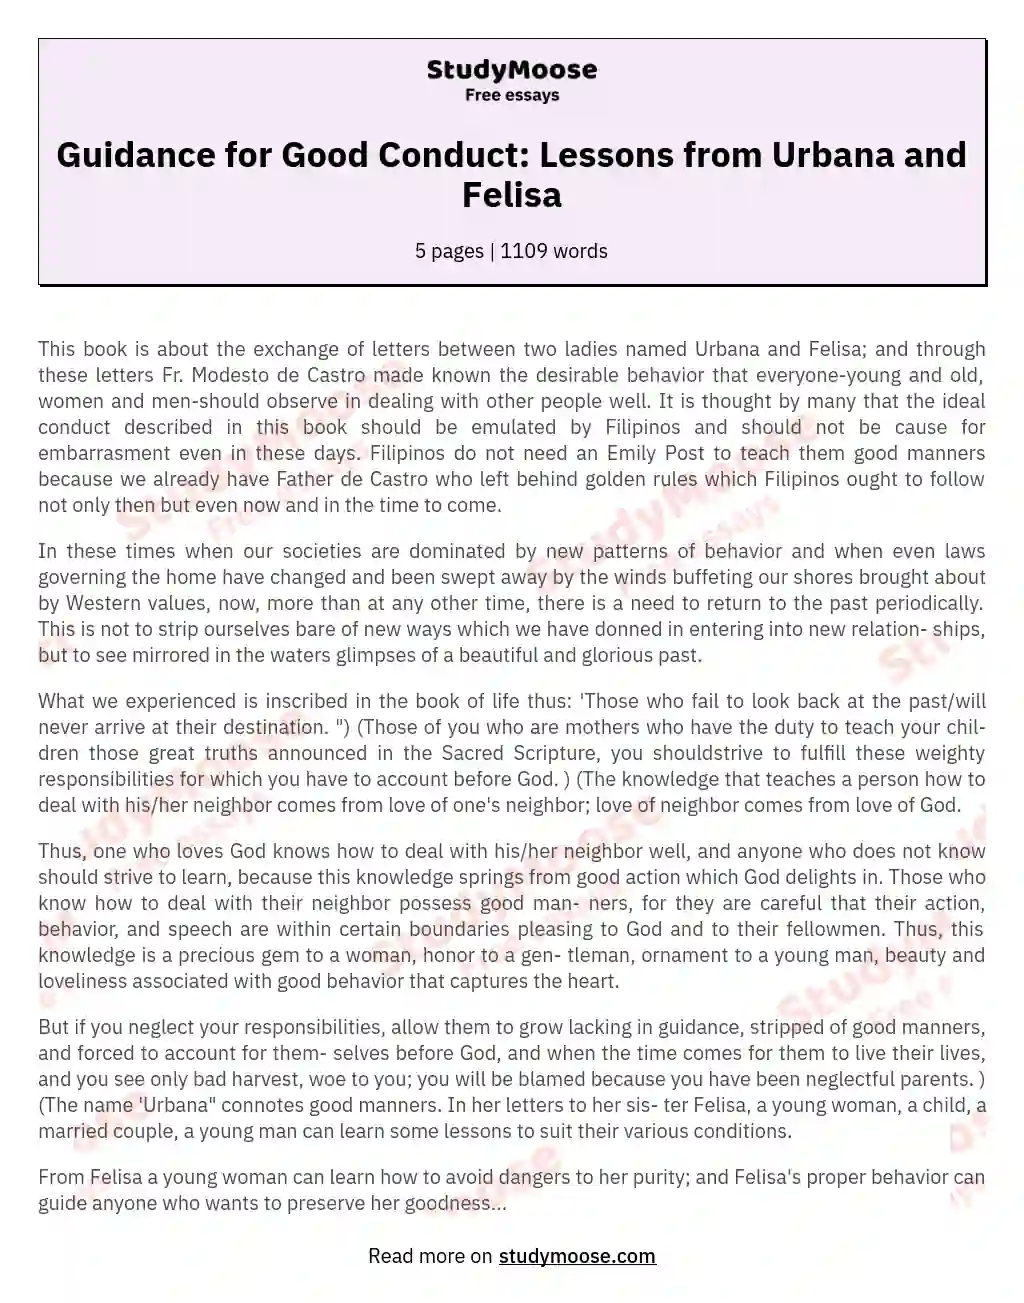 Guidance for Good Conduct: Lessons from Urbana and Felisa essay